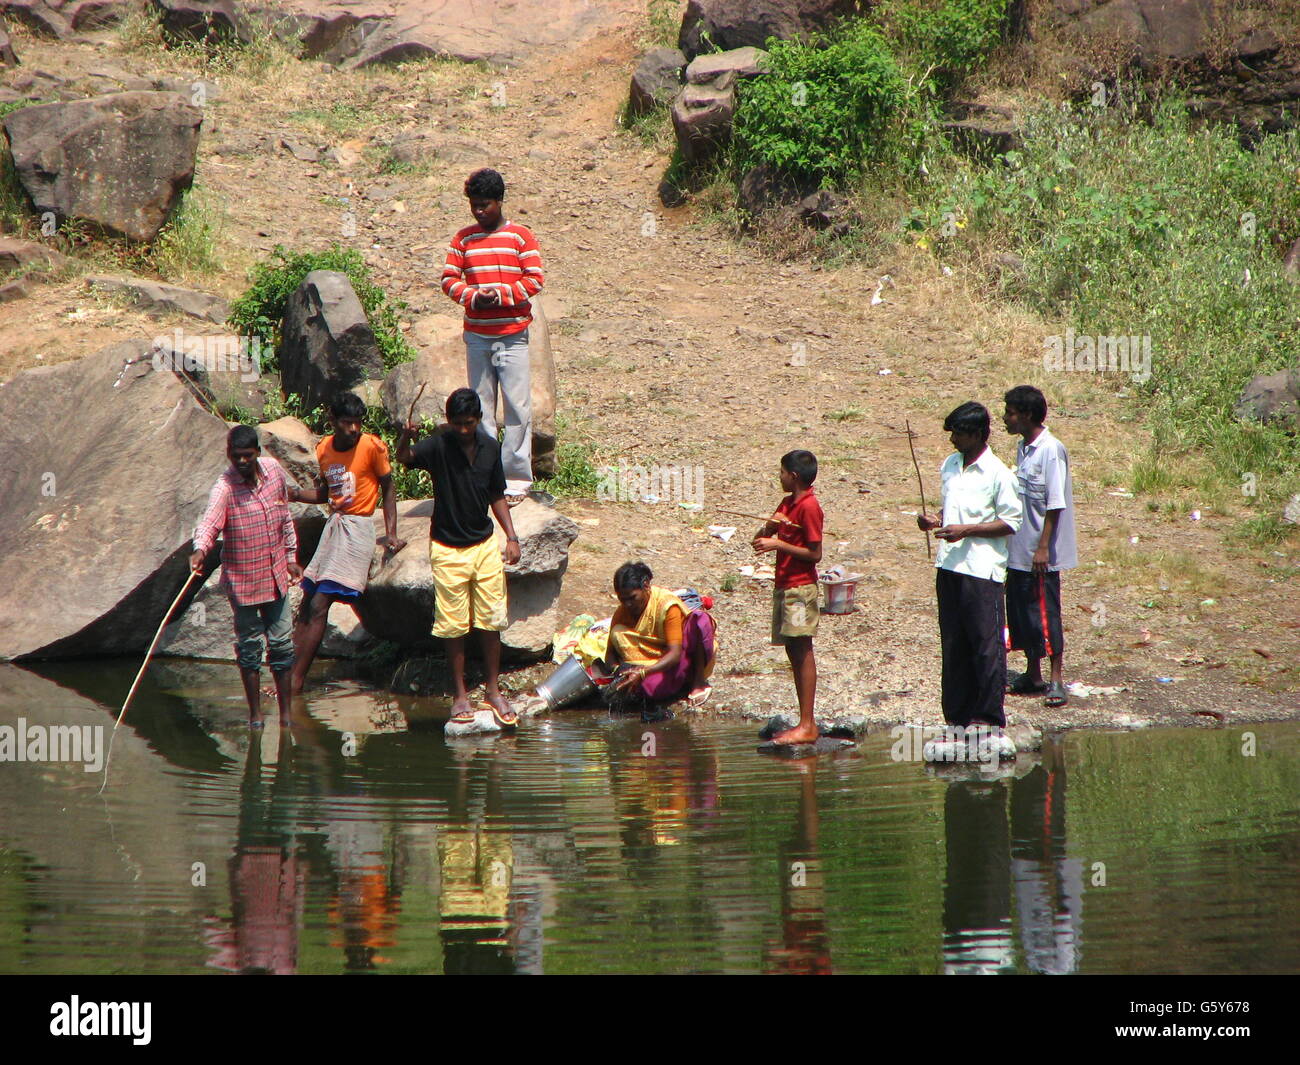 Poor people fishing in a river in India Stock Photo - Alamy